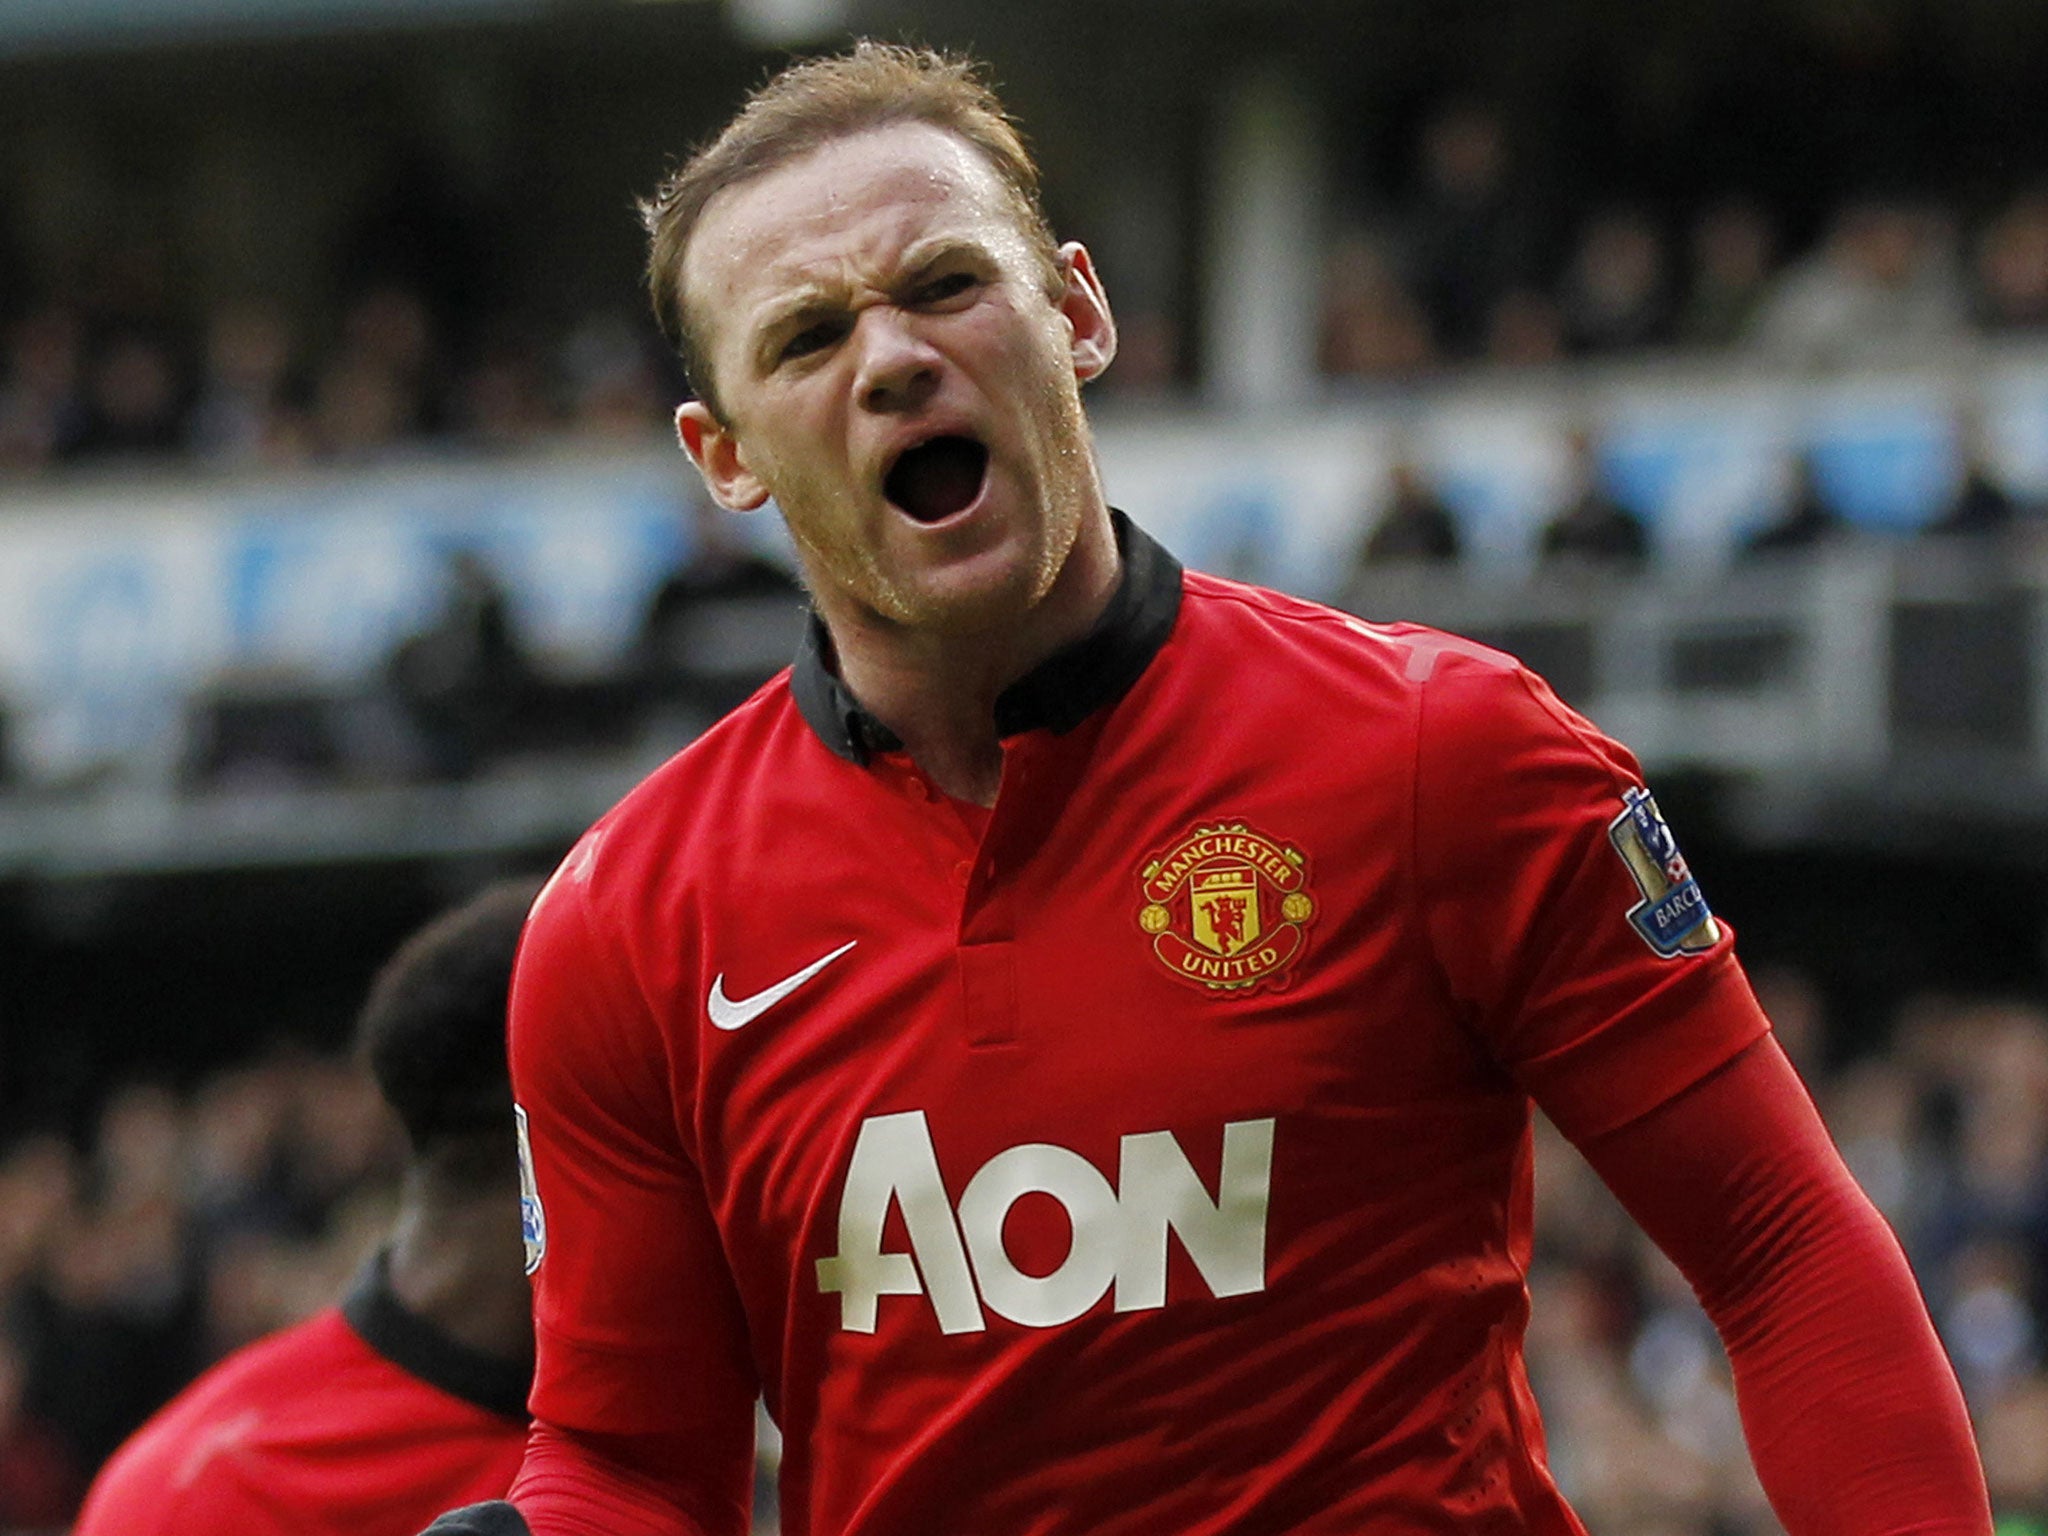 Manchester United striker Wayne Rooney is reported to have turned down the chance to open talks over a new contract